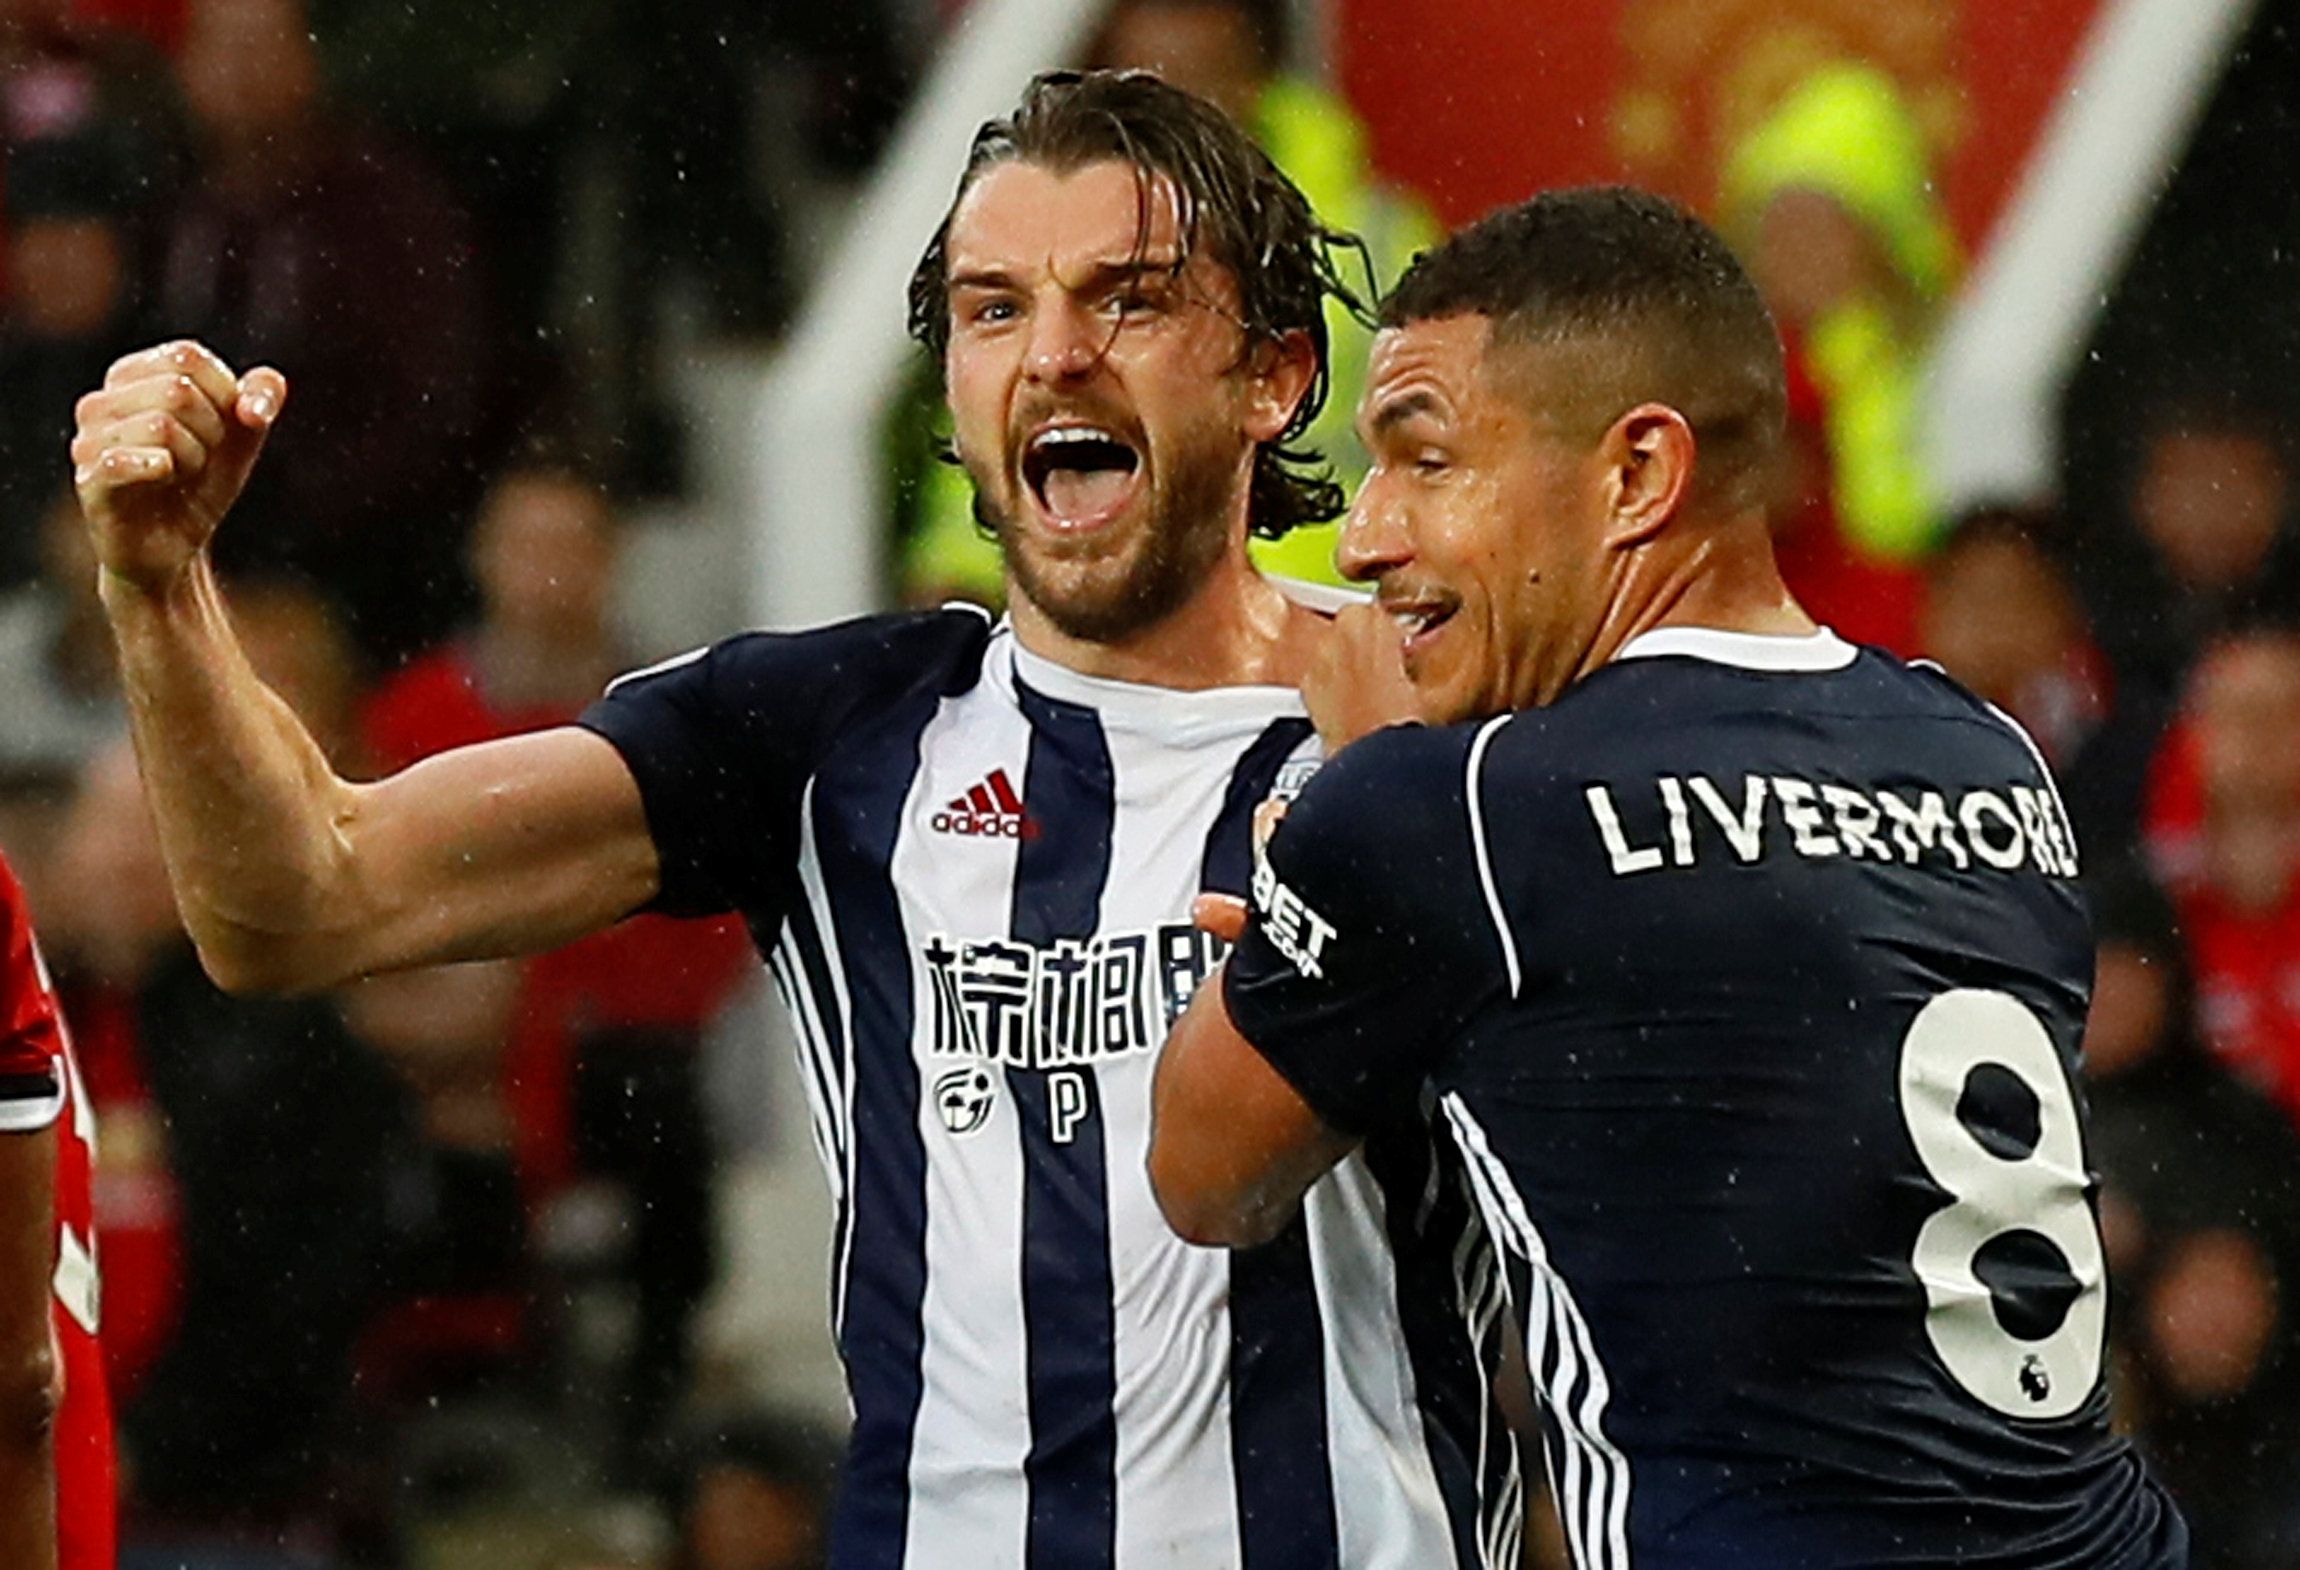 Soccer Football - Premier League - Manchester United vs West Bromwich Albion - Old Trafford, Manchester, Britain - April 15, 2018   West Bromwich Albion's Jay Rodriguez celebrates scoring their first goal with Jake Livermore   Action Images via Reuters/Jason Cairnduff    EDITORIAL USE ONLY. No use with unauthorized audio, video, data, fixture lists, club/league logos or "live" services. Online in-match use limited to 75 images, no video emulation. No use in betting, games or single club/league/p